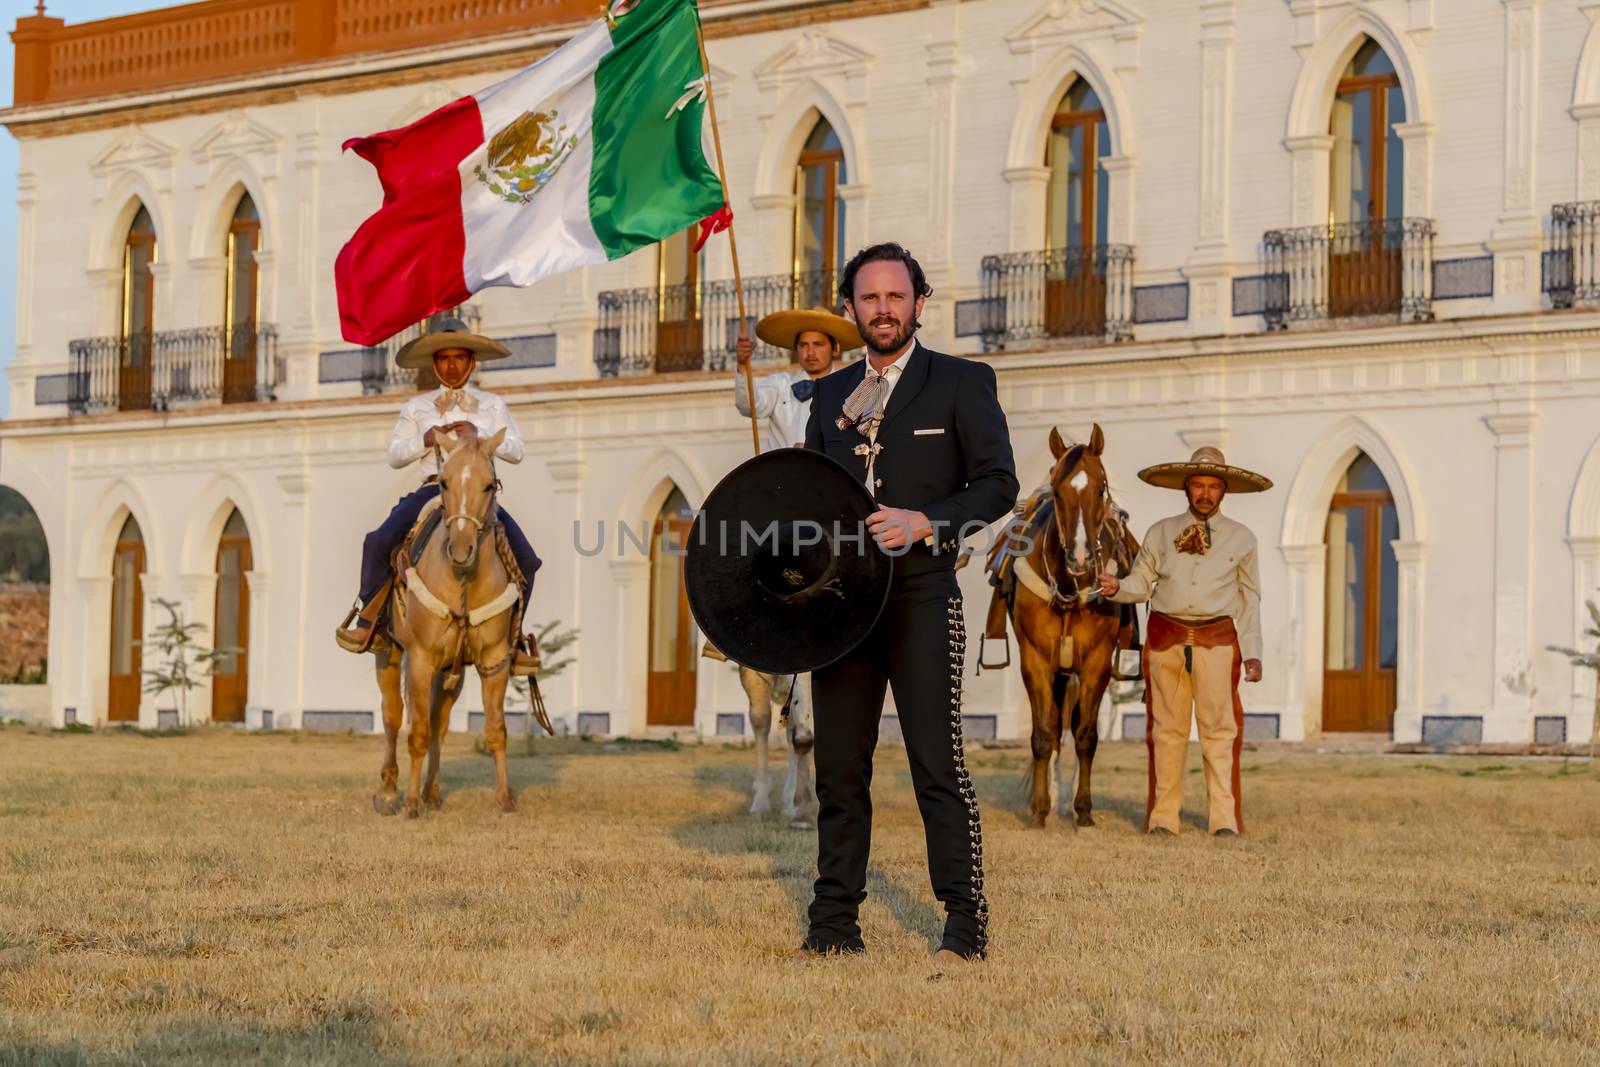 A Very Handsome Mexican Charro Poses In Front Of A Hacienda In The Mexican Countryside by actionsports